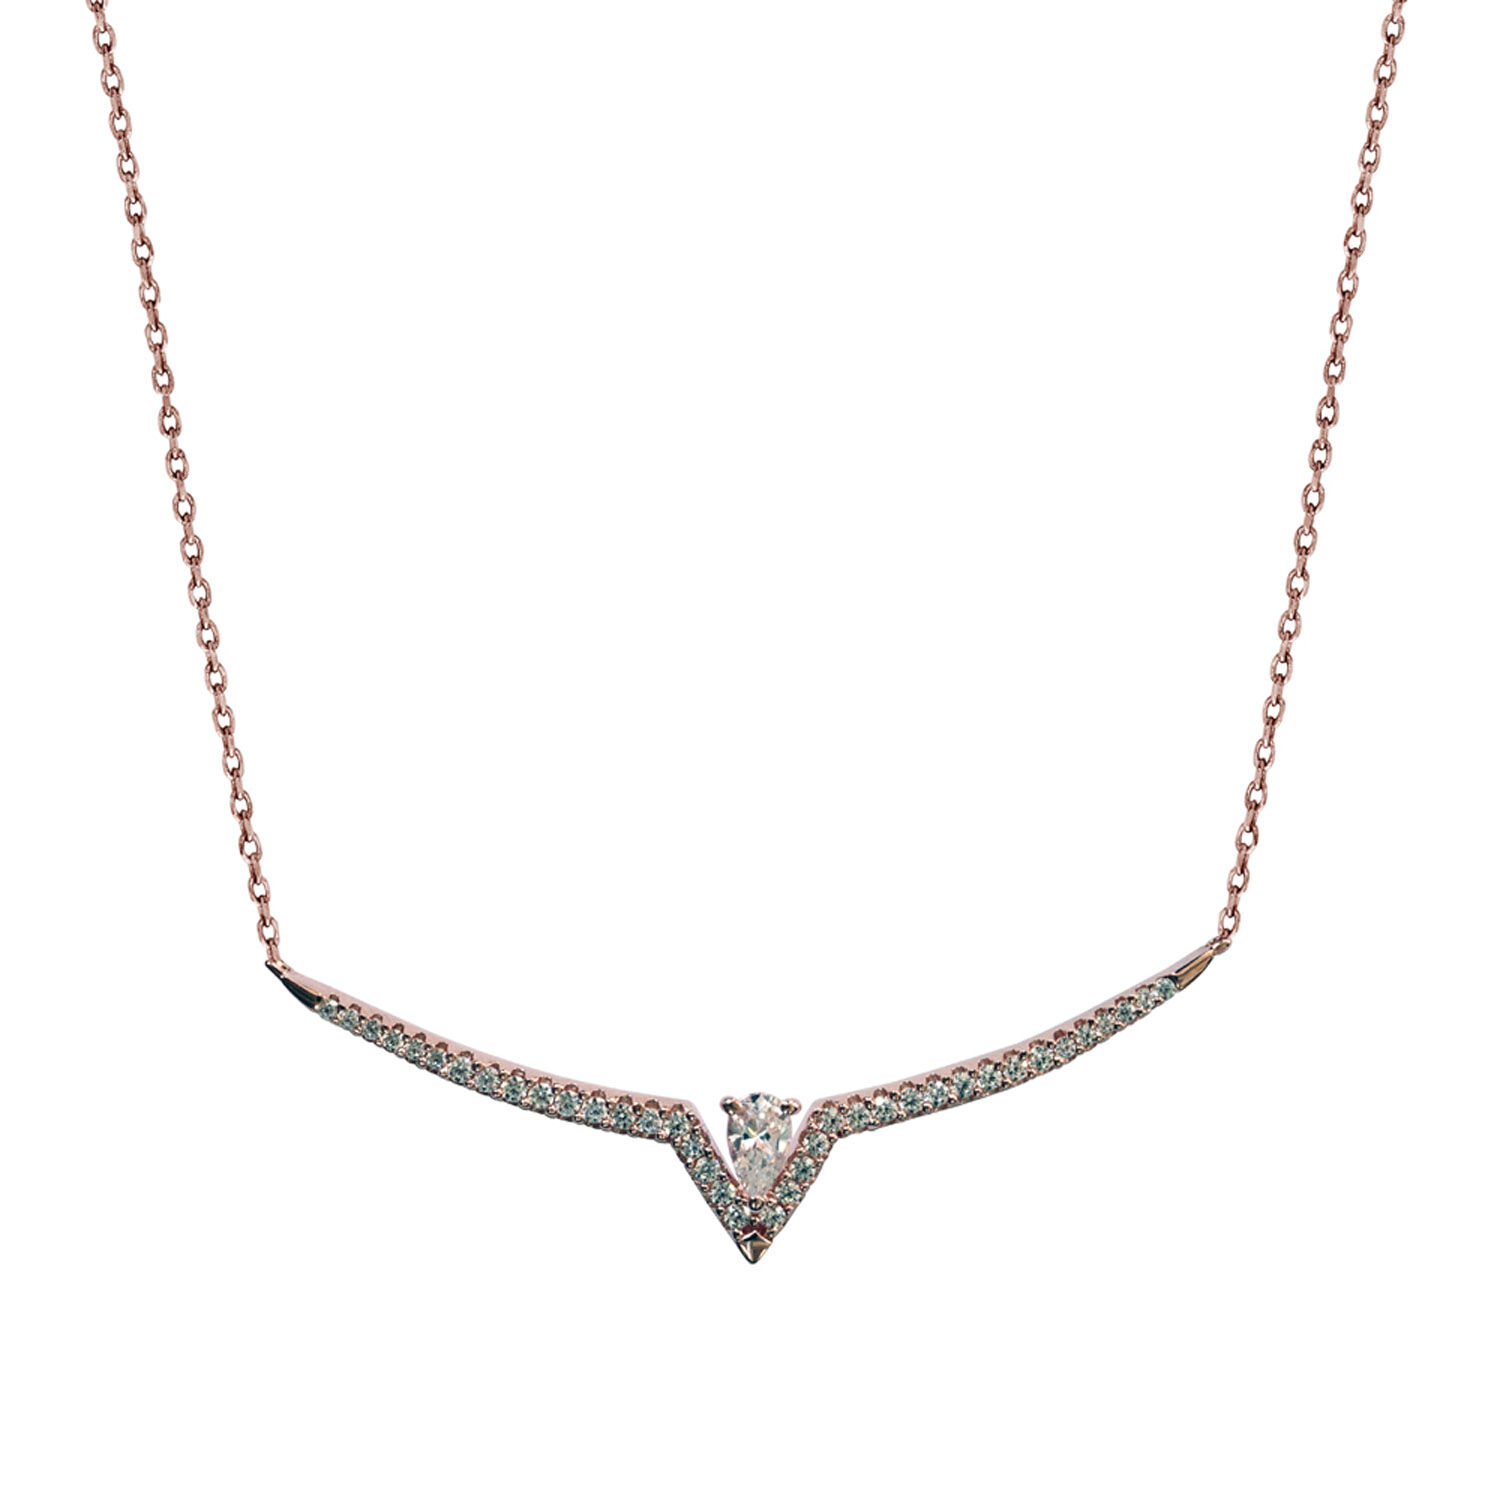 Tiny Interlocking Hearts Necklace in Rose Gold | Lisa Angel